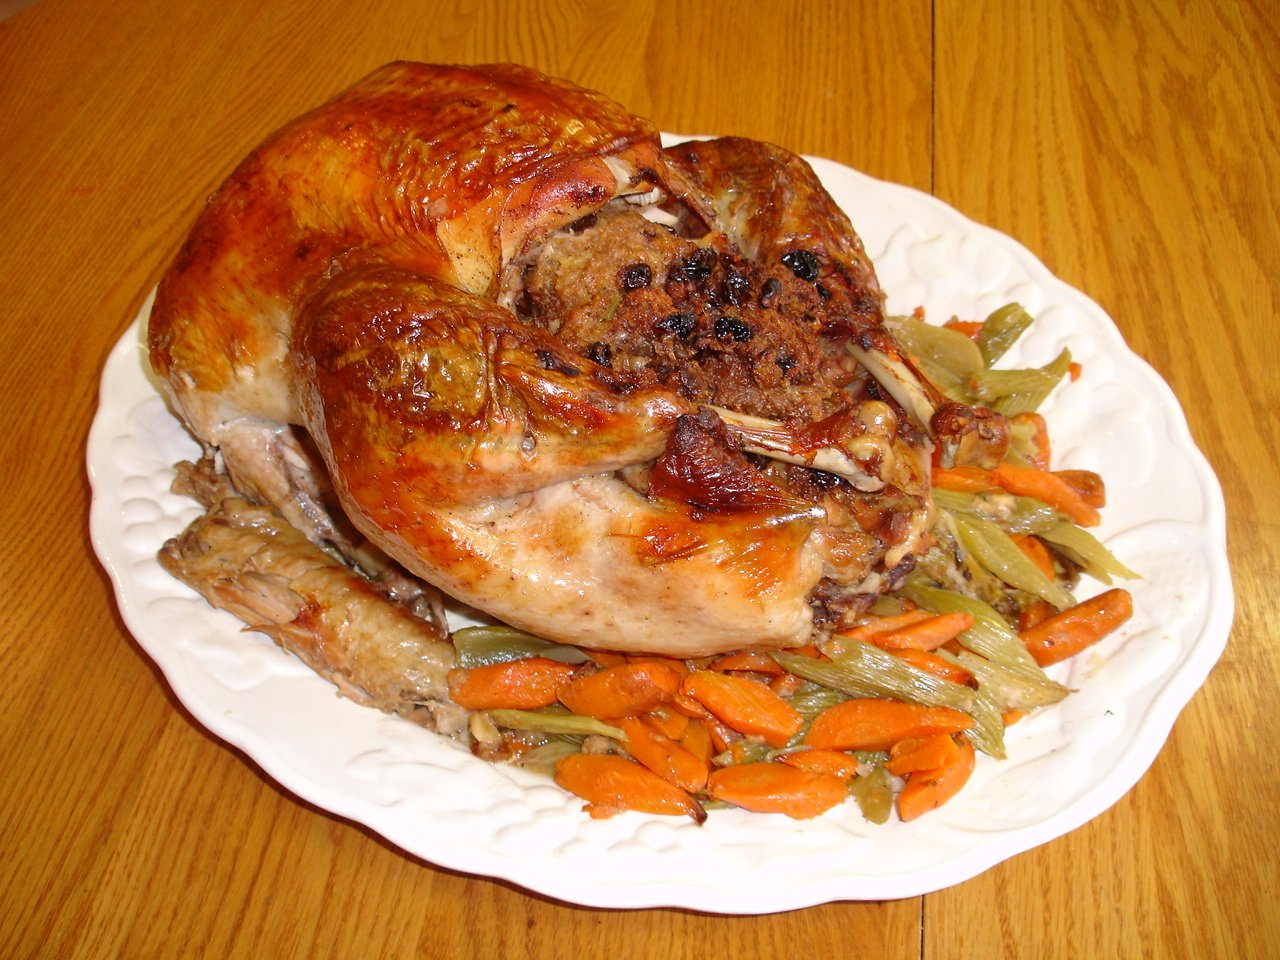 a large roast turkey sits on a white plate with some veggies and carrots